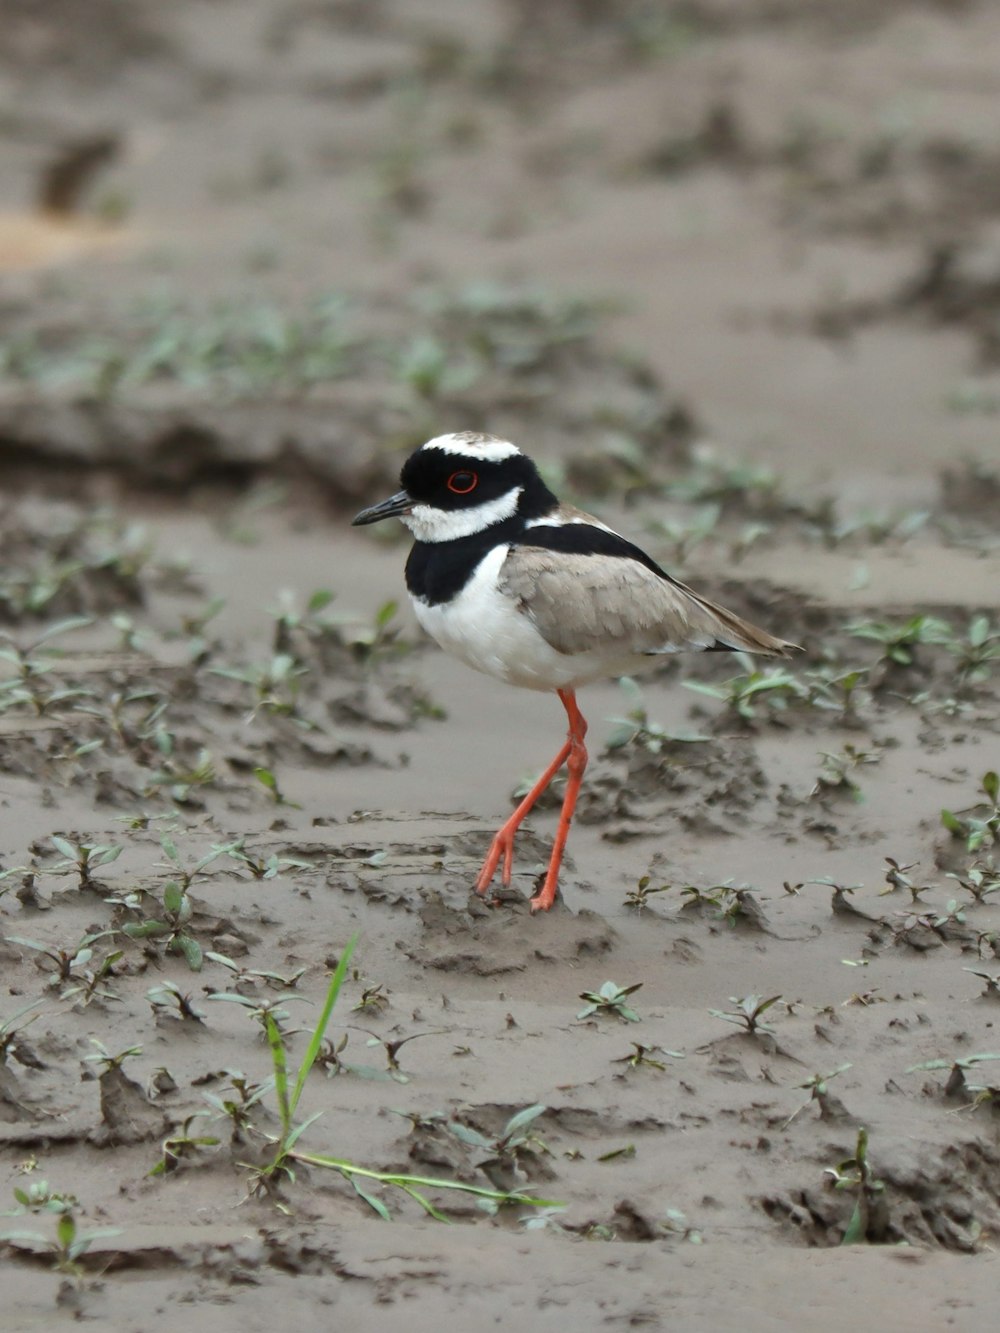 a black and white bird standing in the sand